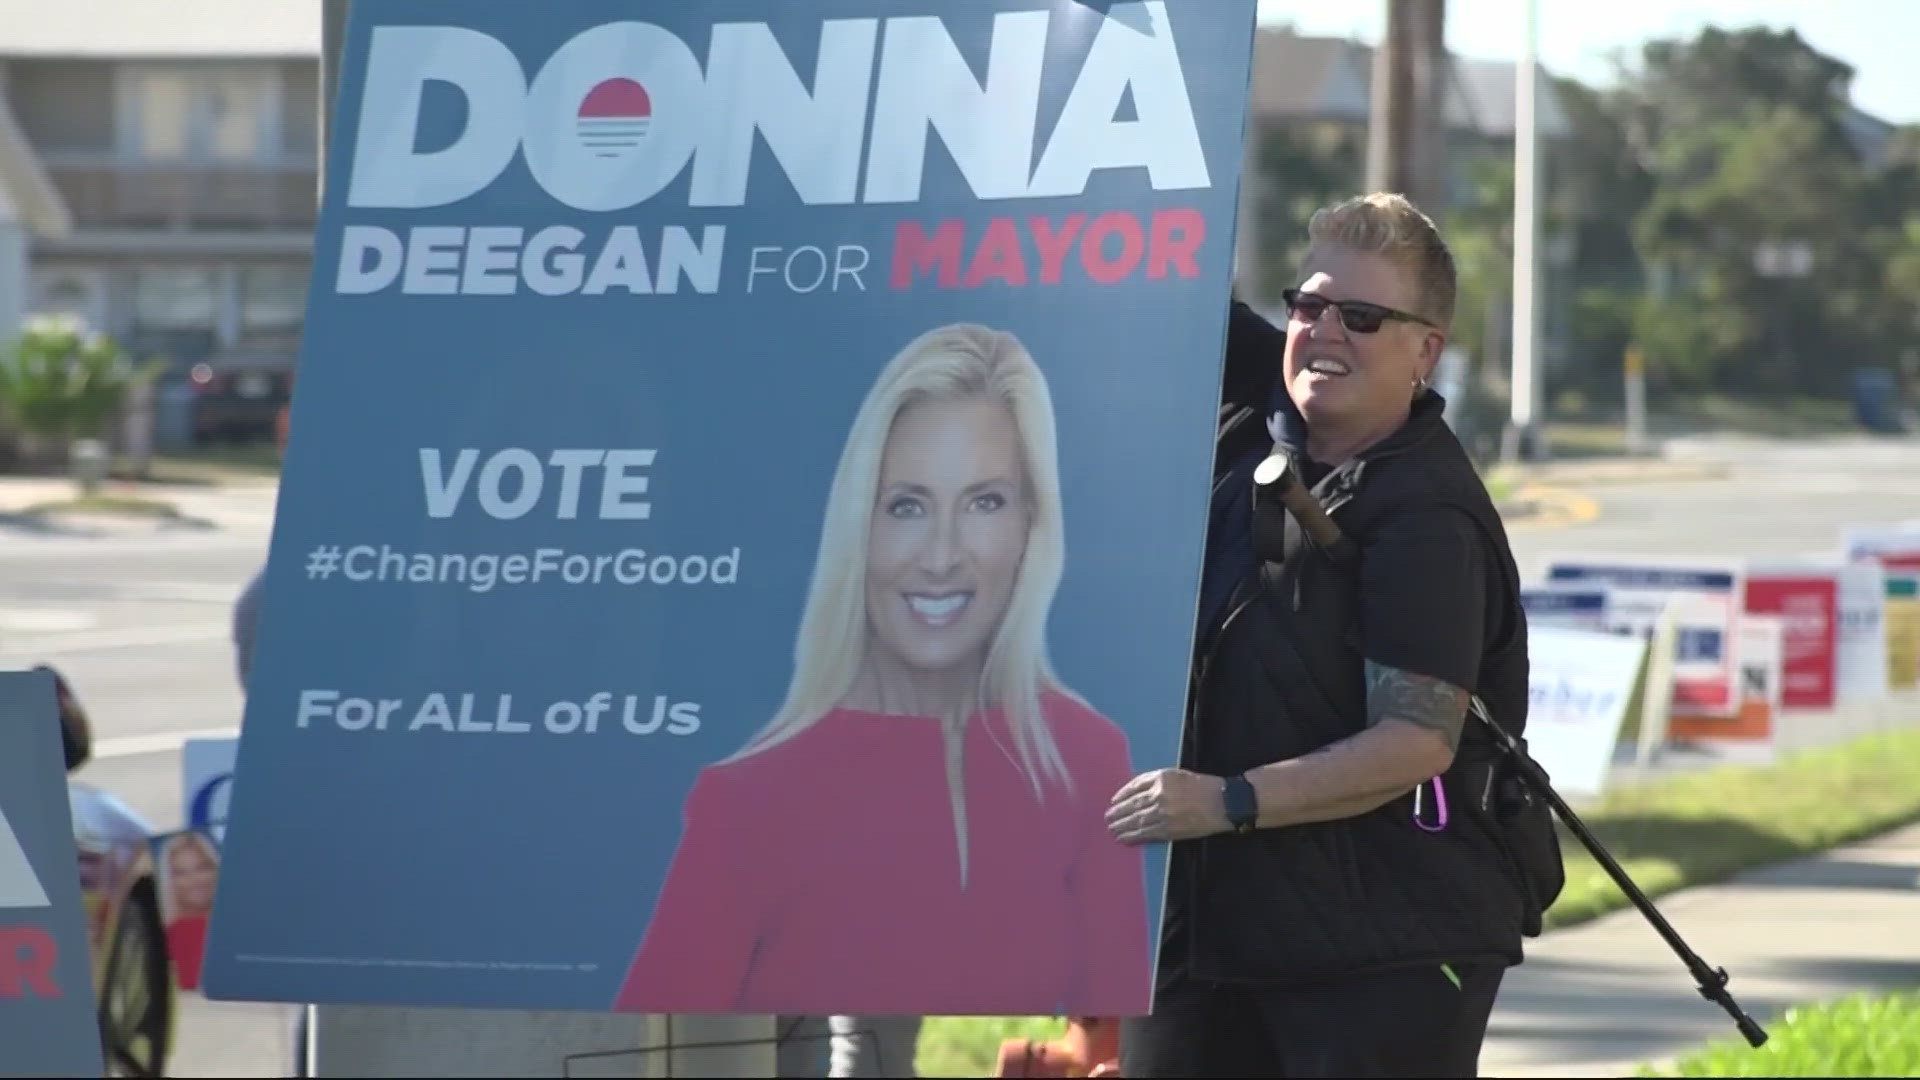 Democratic Candidate Donna Deegan greeted supporters at the Beaches Branch Library, an early voting location, before and after going in to vote.